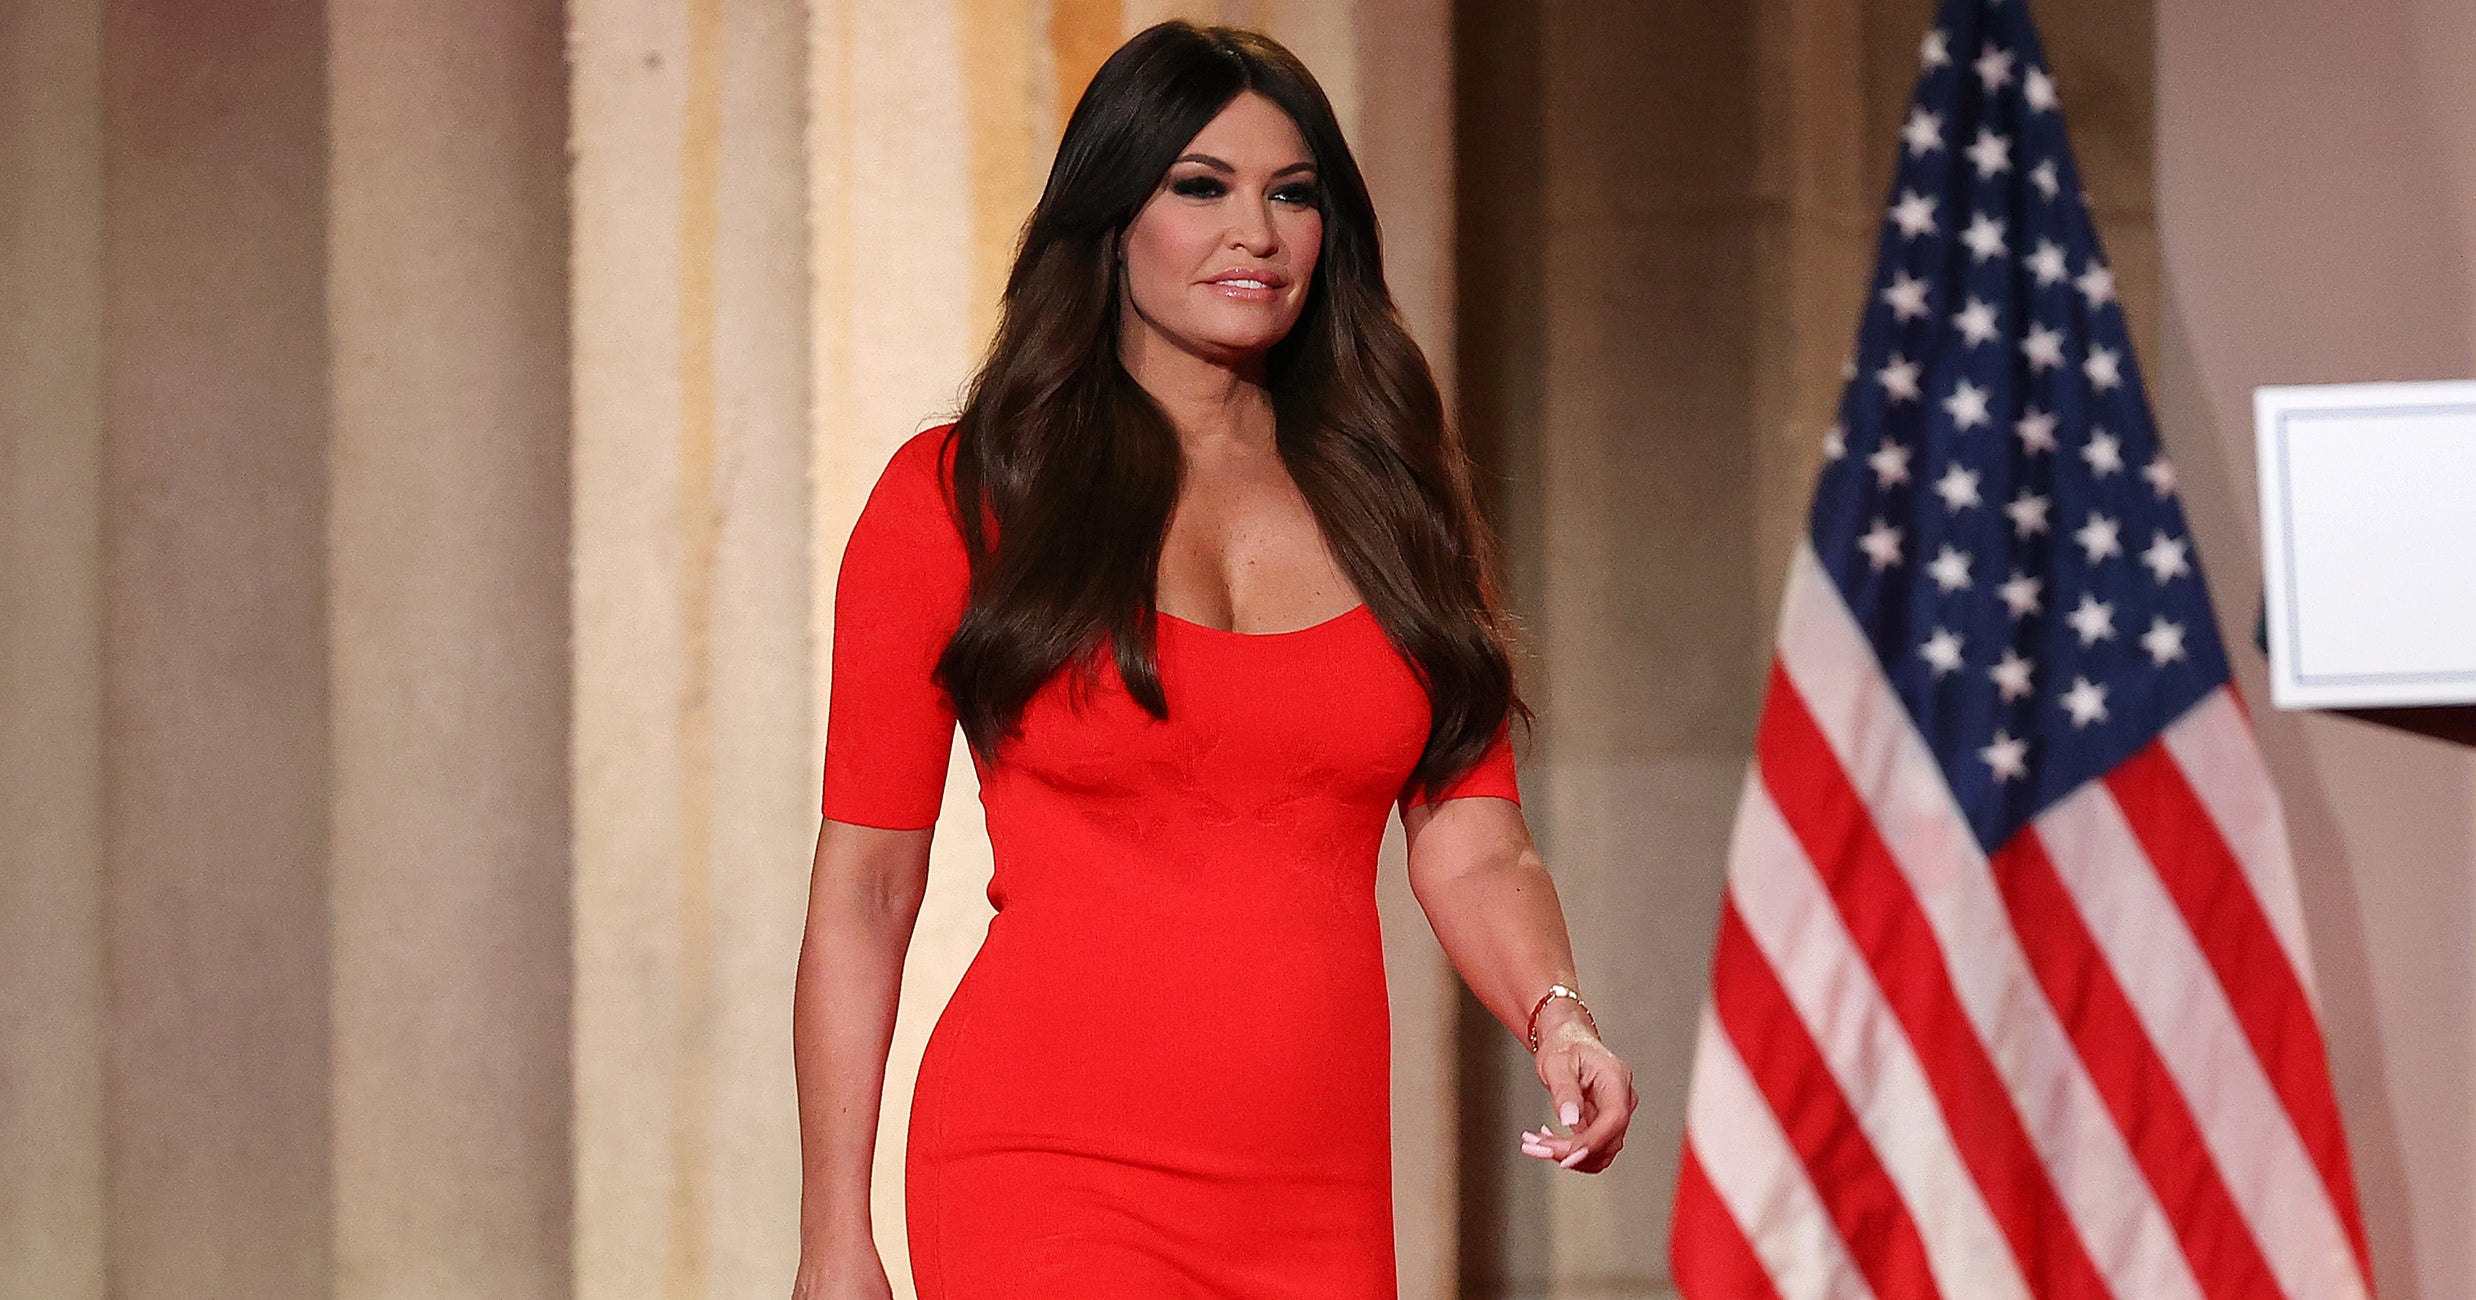 Whats In Kimberly Guilfoyle Sexual Harassment Complaint.